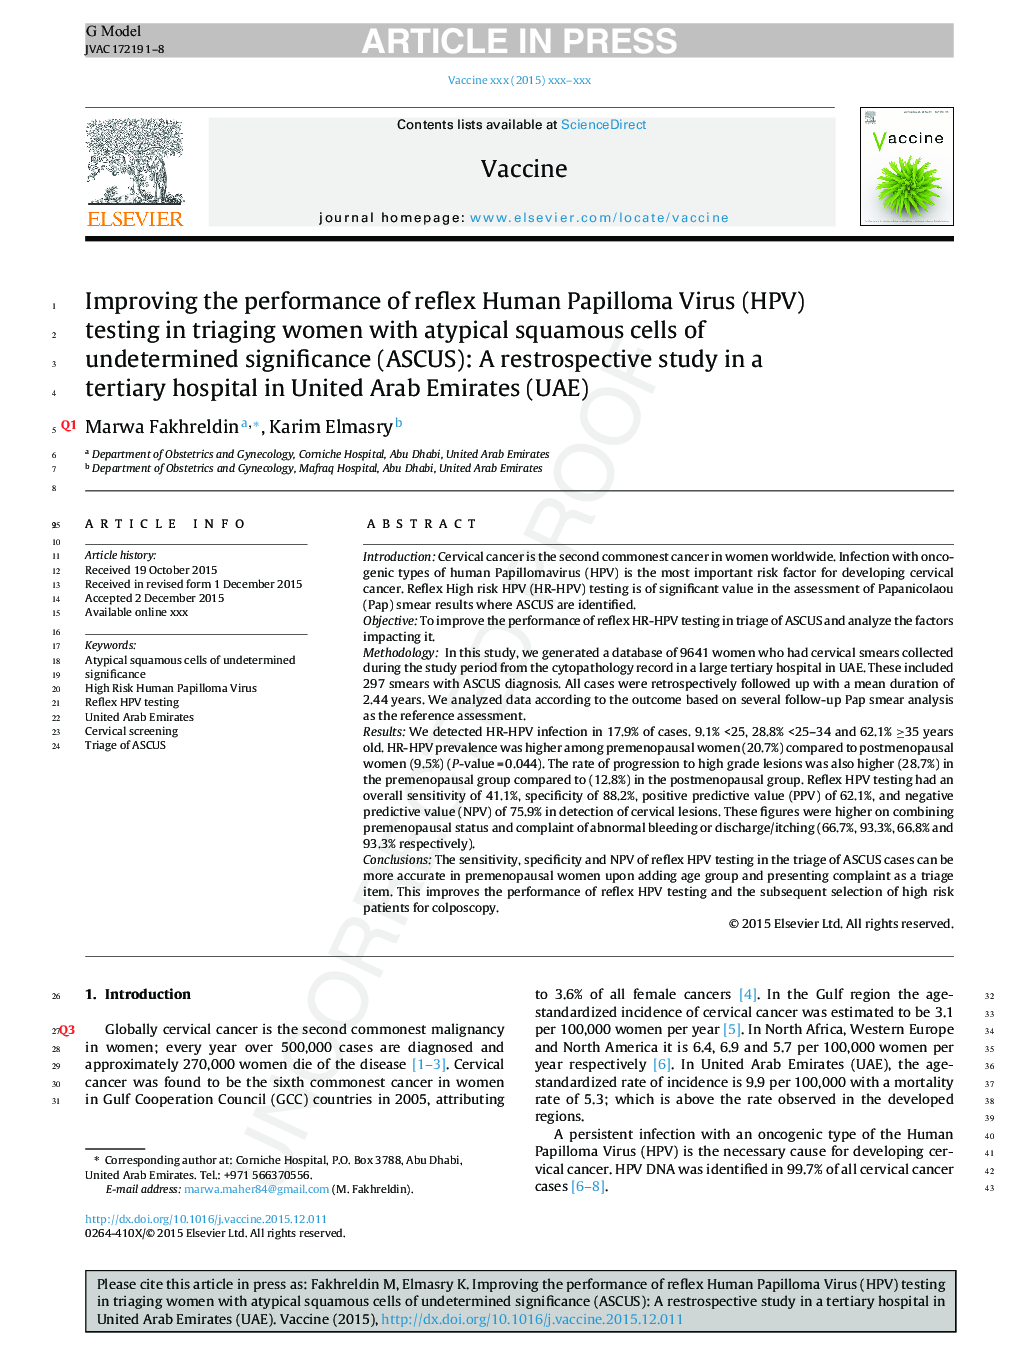 Improving the performance of reflex Human Papilloma Virus (HPV) testing in triaging women with atypical squamous cells of undetermined significance (ASCUS): A restrospective study in a tertiary hospital in United Arab Emirates (UAE)